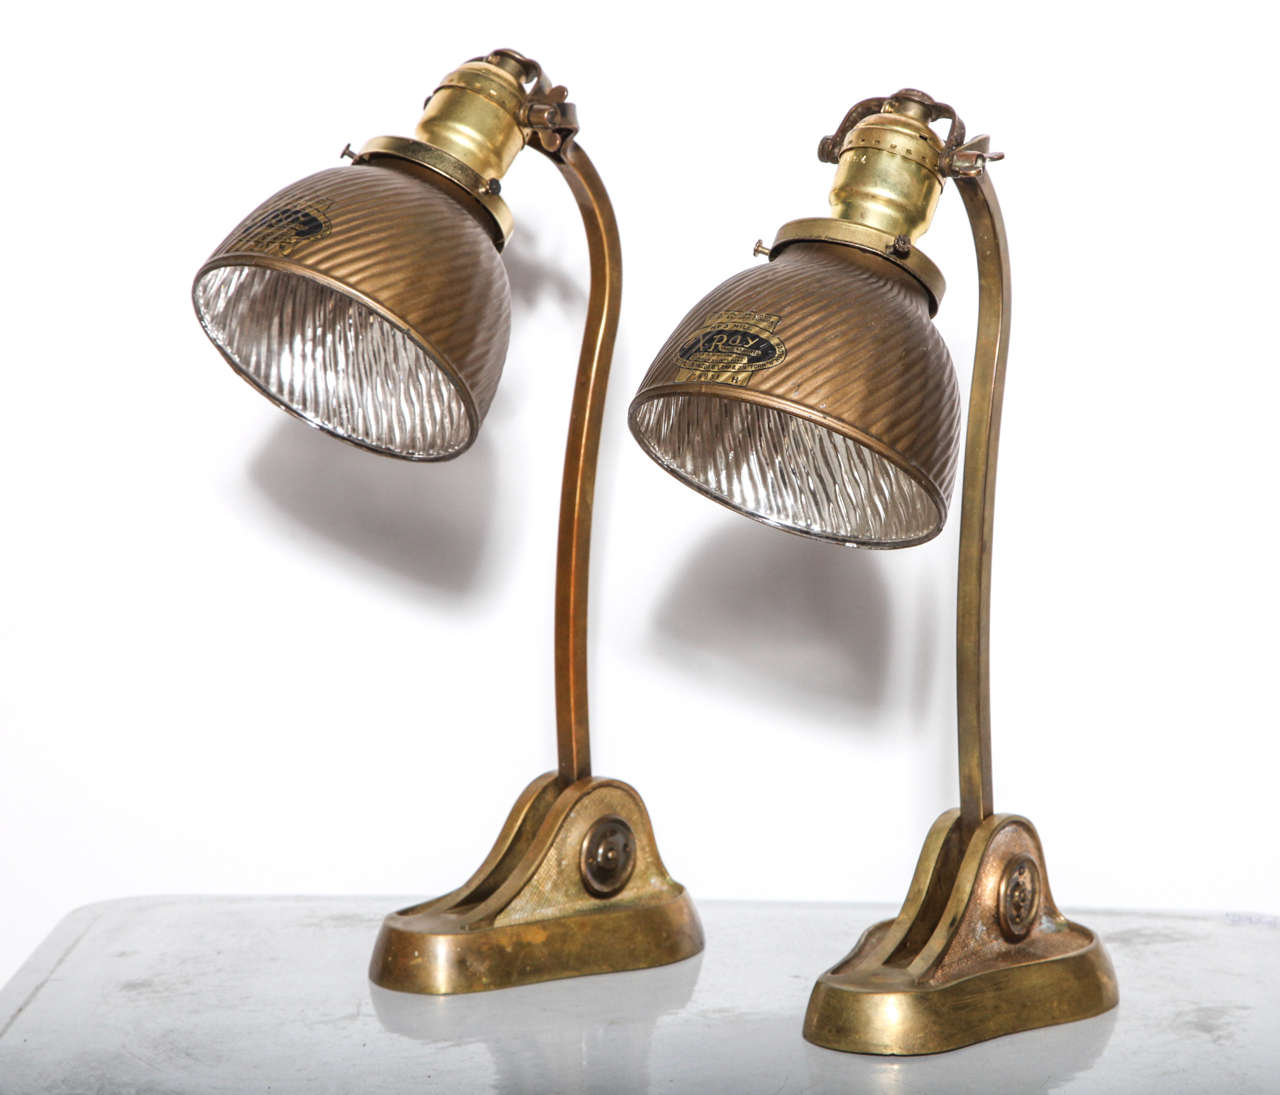 2 heavy adjustable Art Nouveau Bronze Sconces, Work Lights, Desk Lamps or small Table Lamps.  Keyhole shaped textured bases, adjustable curved swing arms, with a pair of adjustable period XRay Mercury Glass Shades.  Shade exterior: Gold. Shade